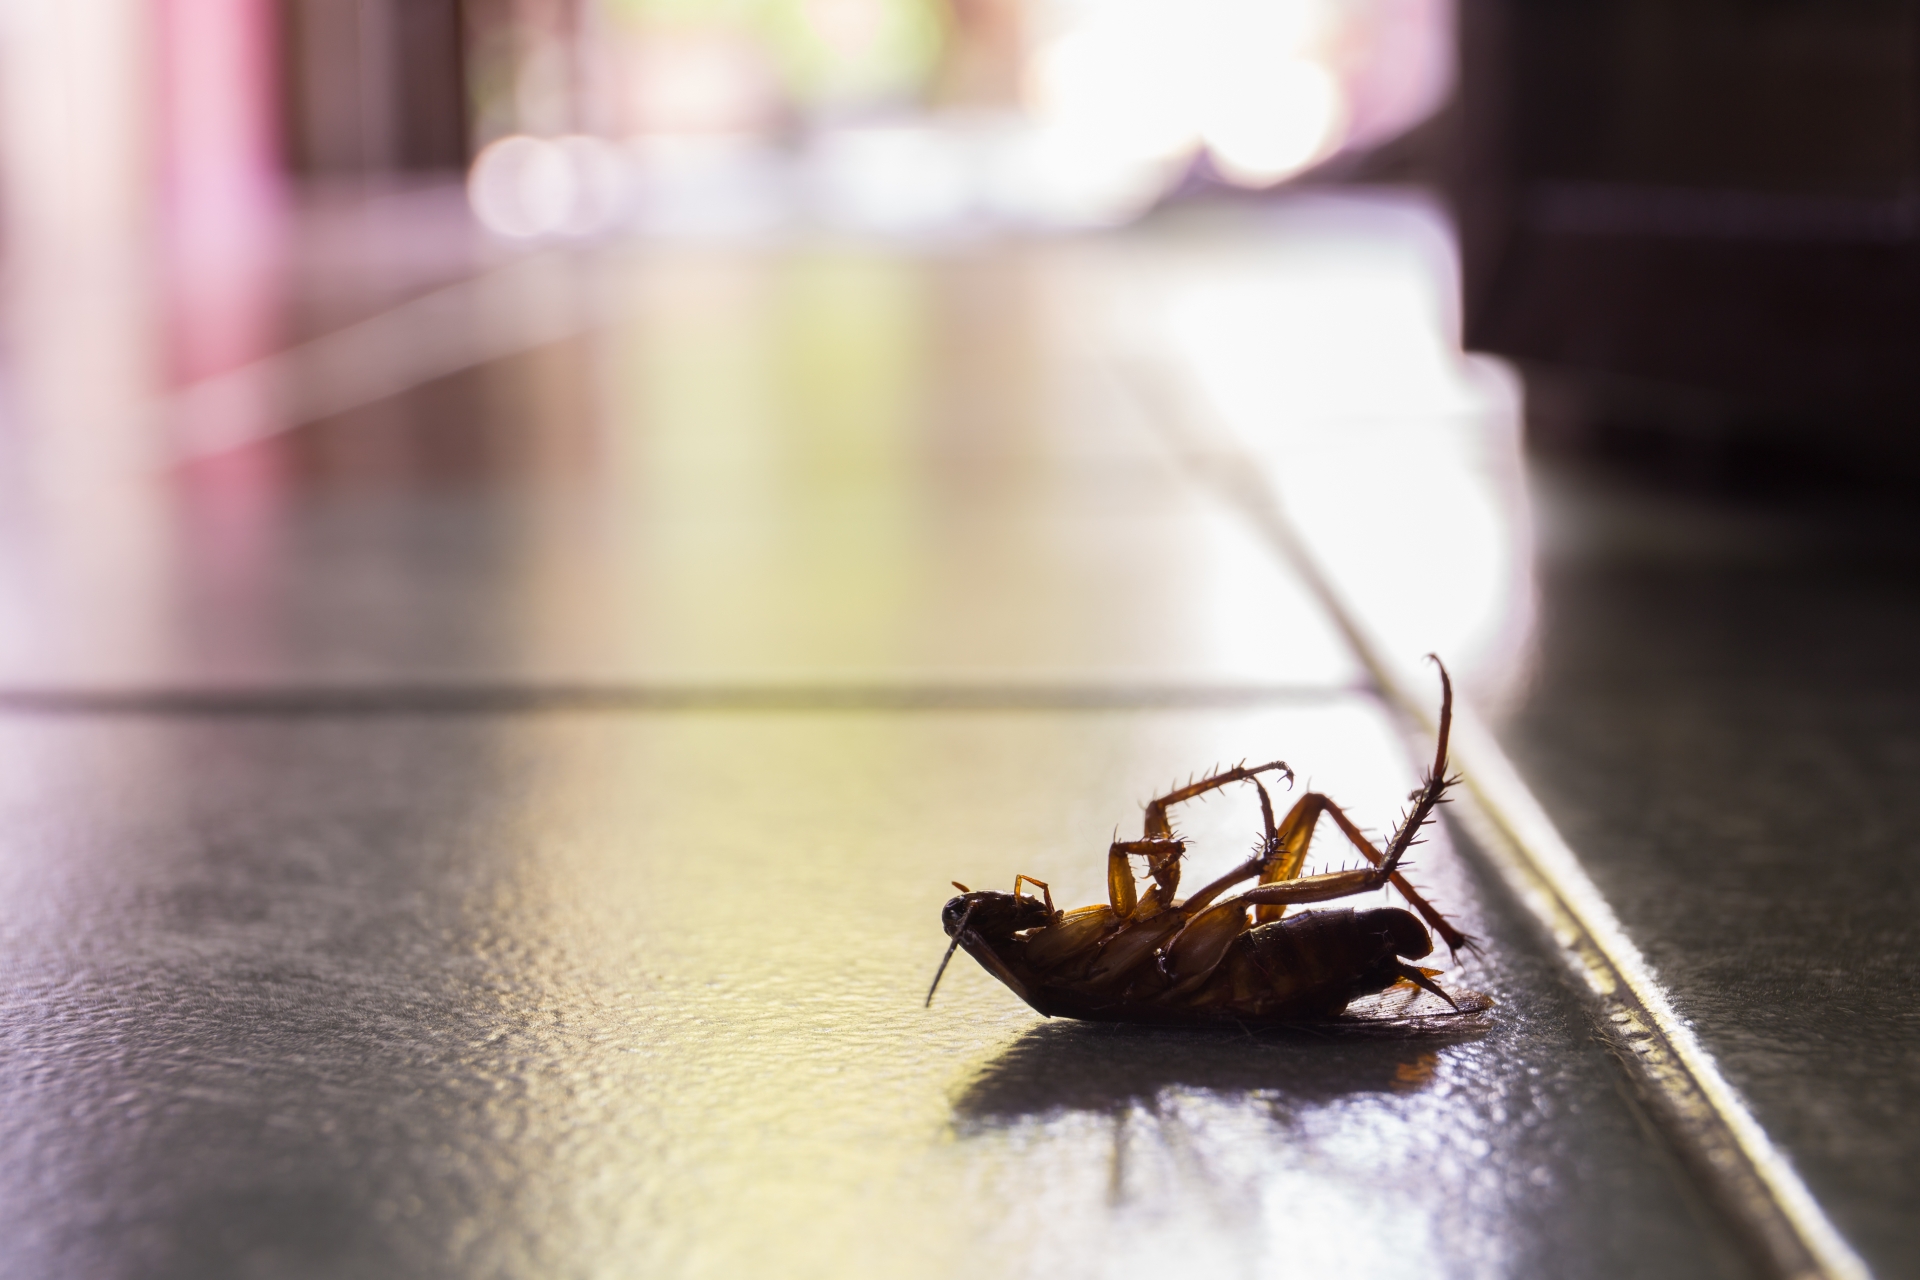 Cockroach Control, Pest Control in Longfield, Hartley, New Ash Green, DA3. Call Now 020 8166 9746